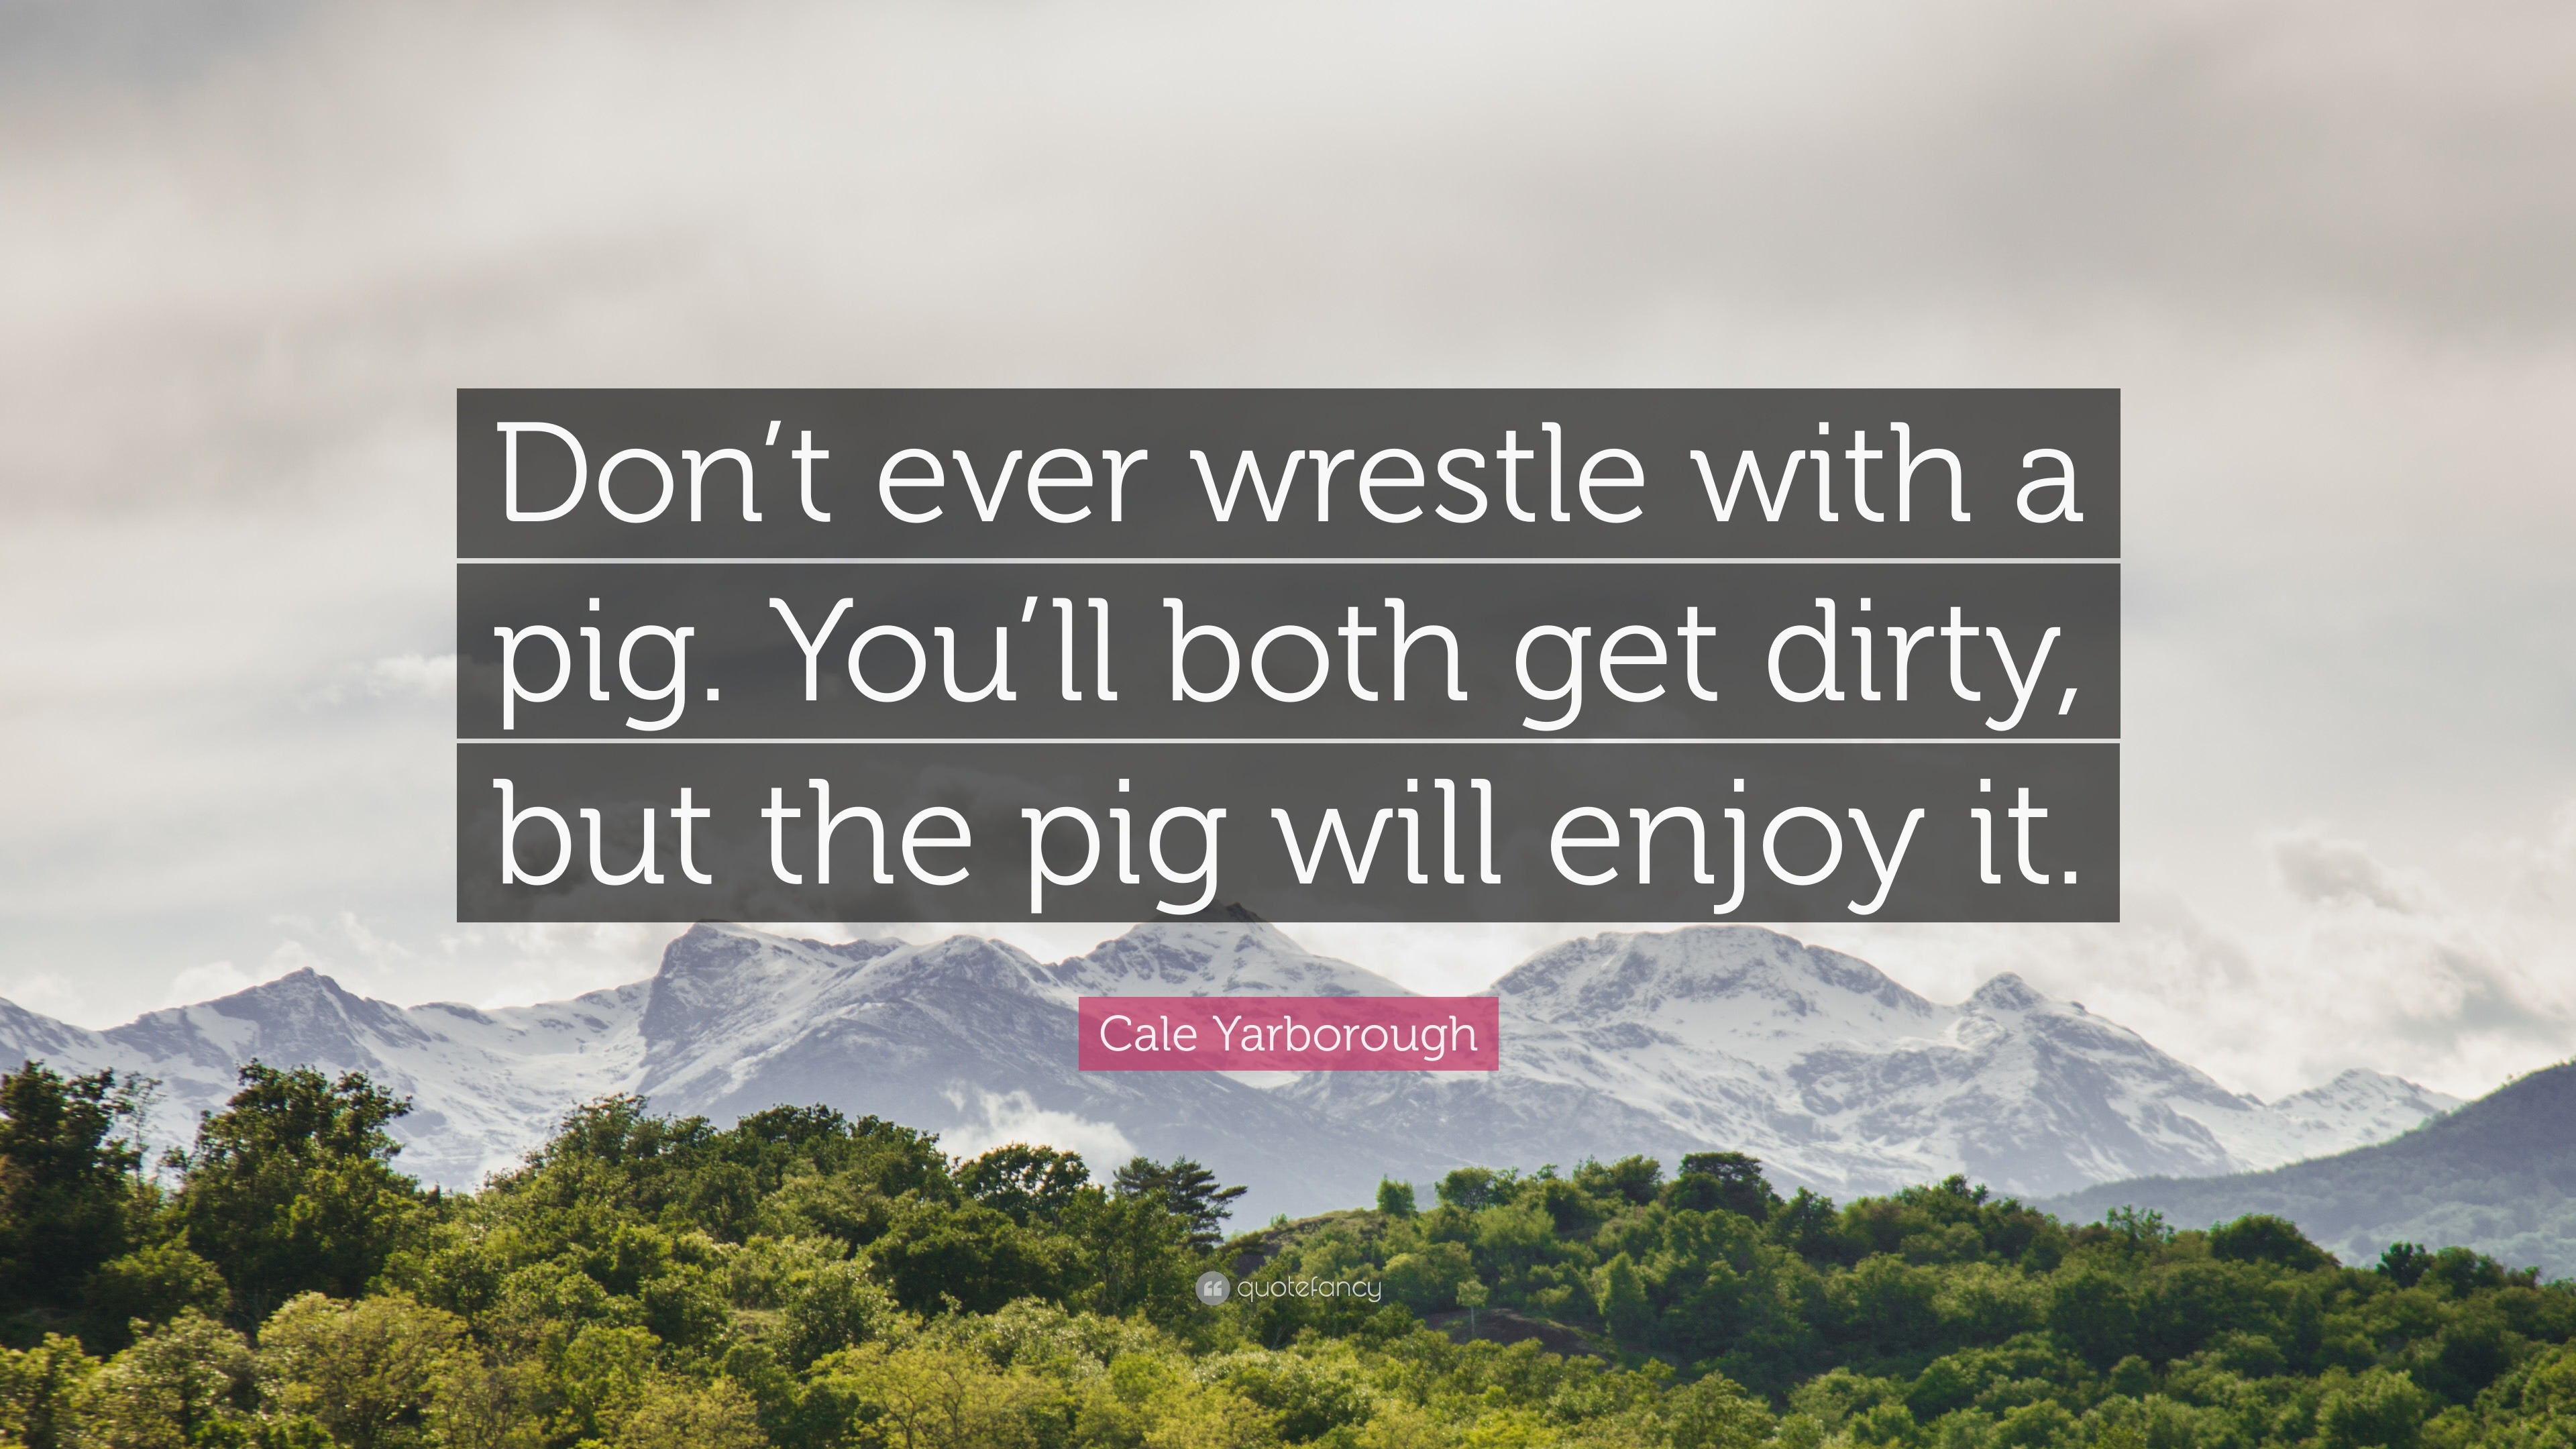 Cale Yarborough Quote: “Don't ever wrestle with a pig. You'll both get  dirty, but